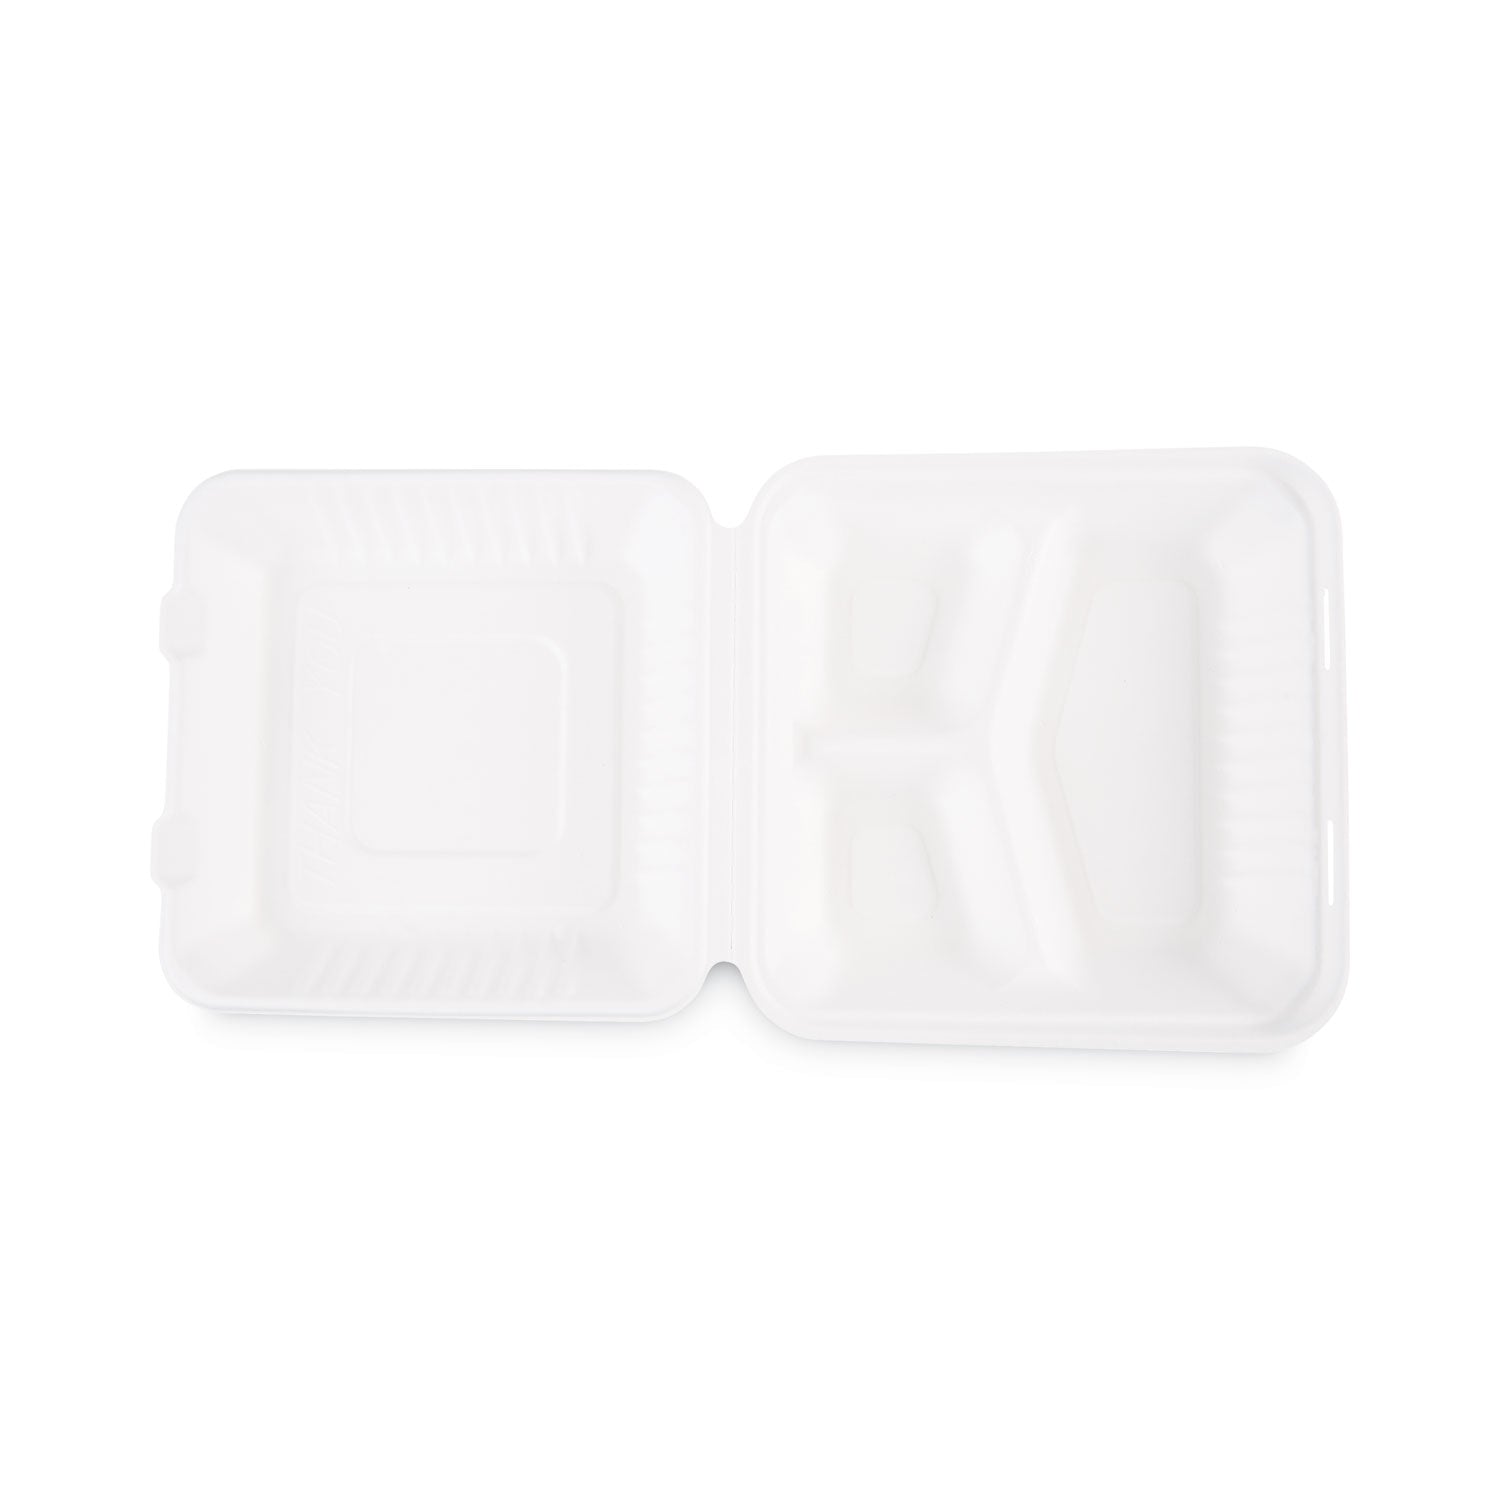 bagasse-food-containers-hinged-lid-3-compartment-9-x-9-x-319-white-sugarcane-100-sleeve-2-sleeves-carton_bwkhingewf3cm9 - 7